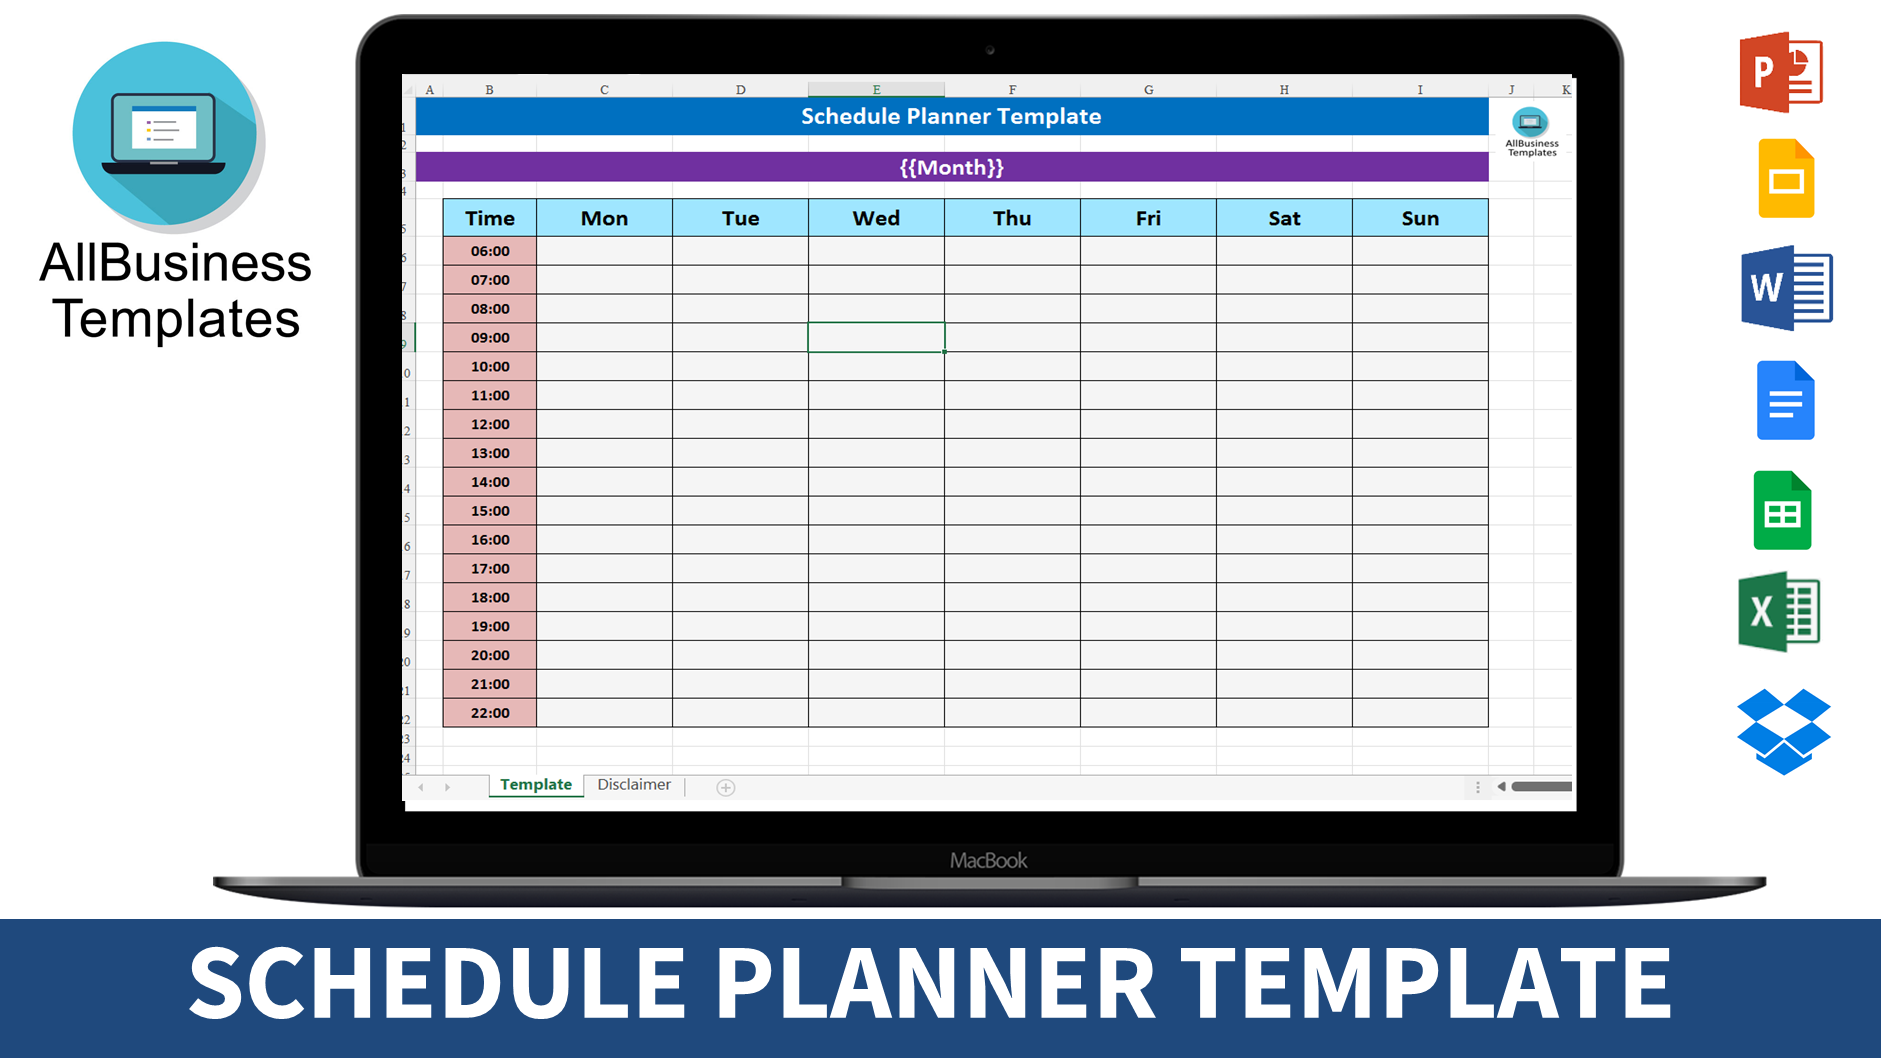 Schedule Planner Template main image